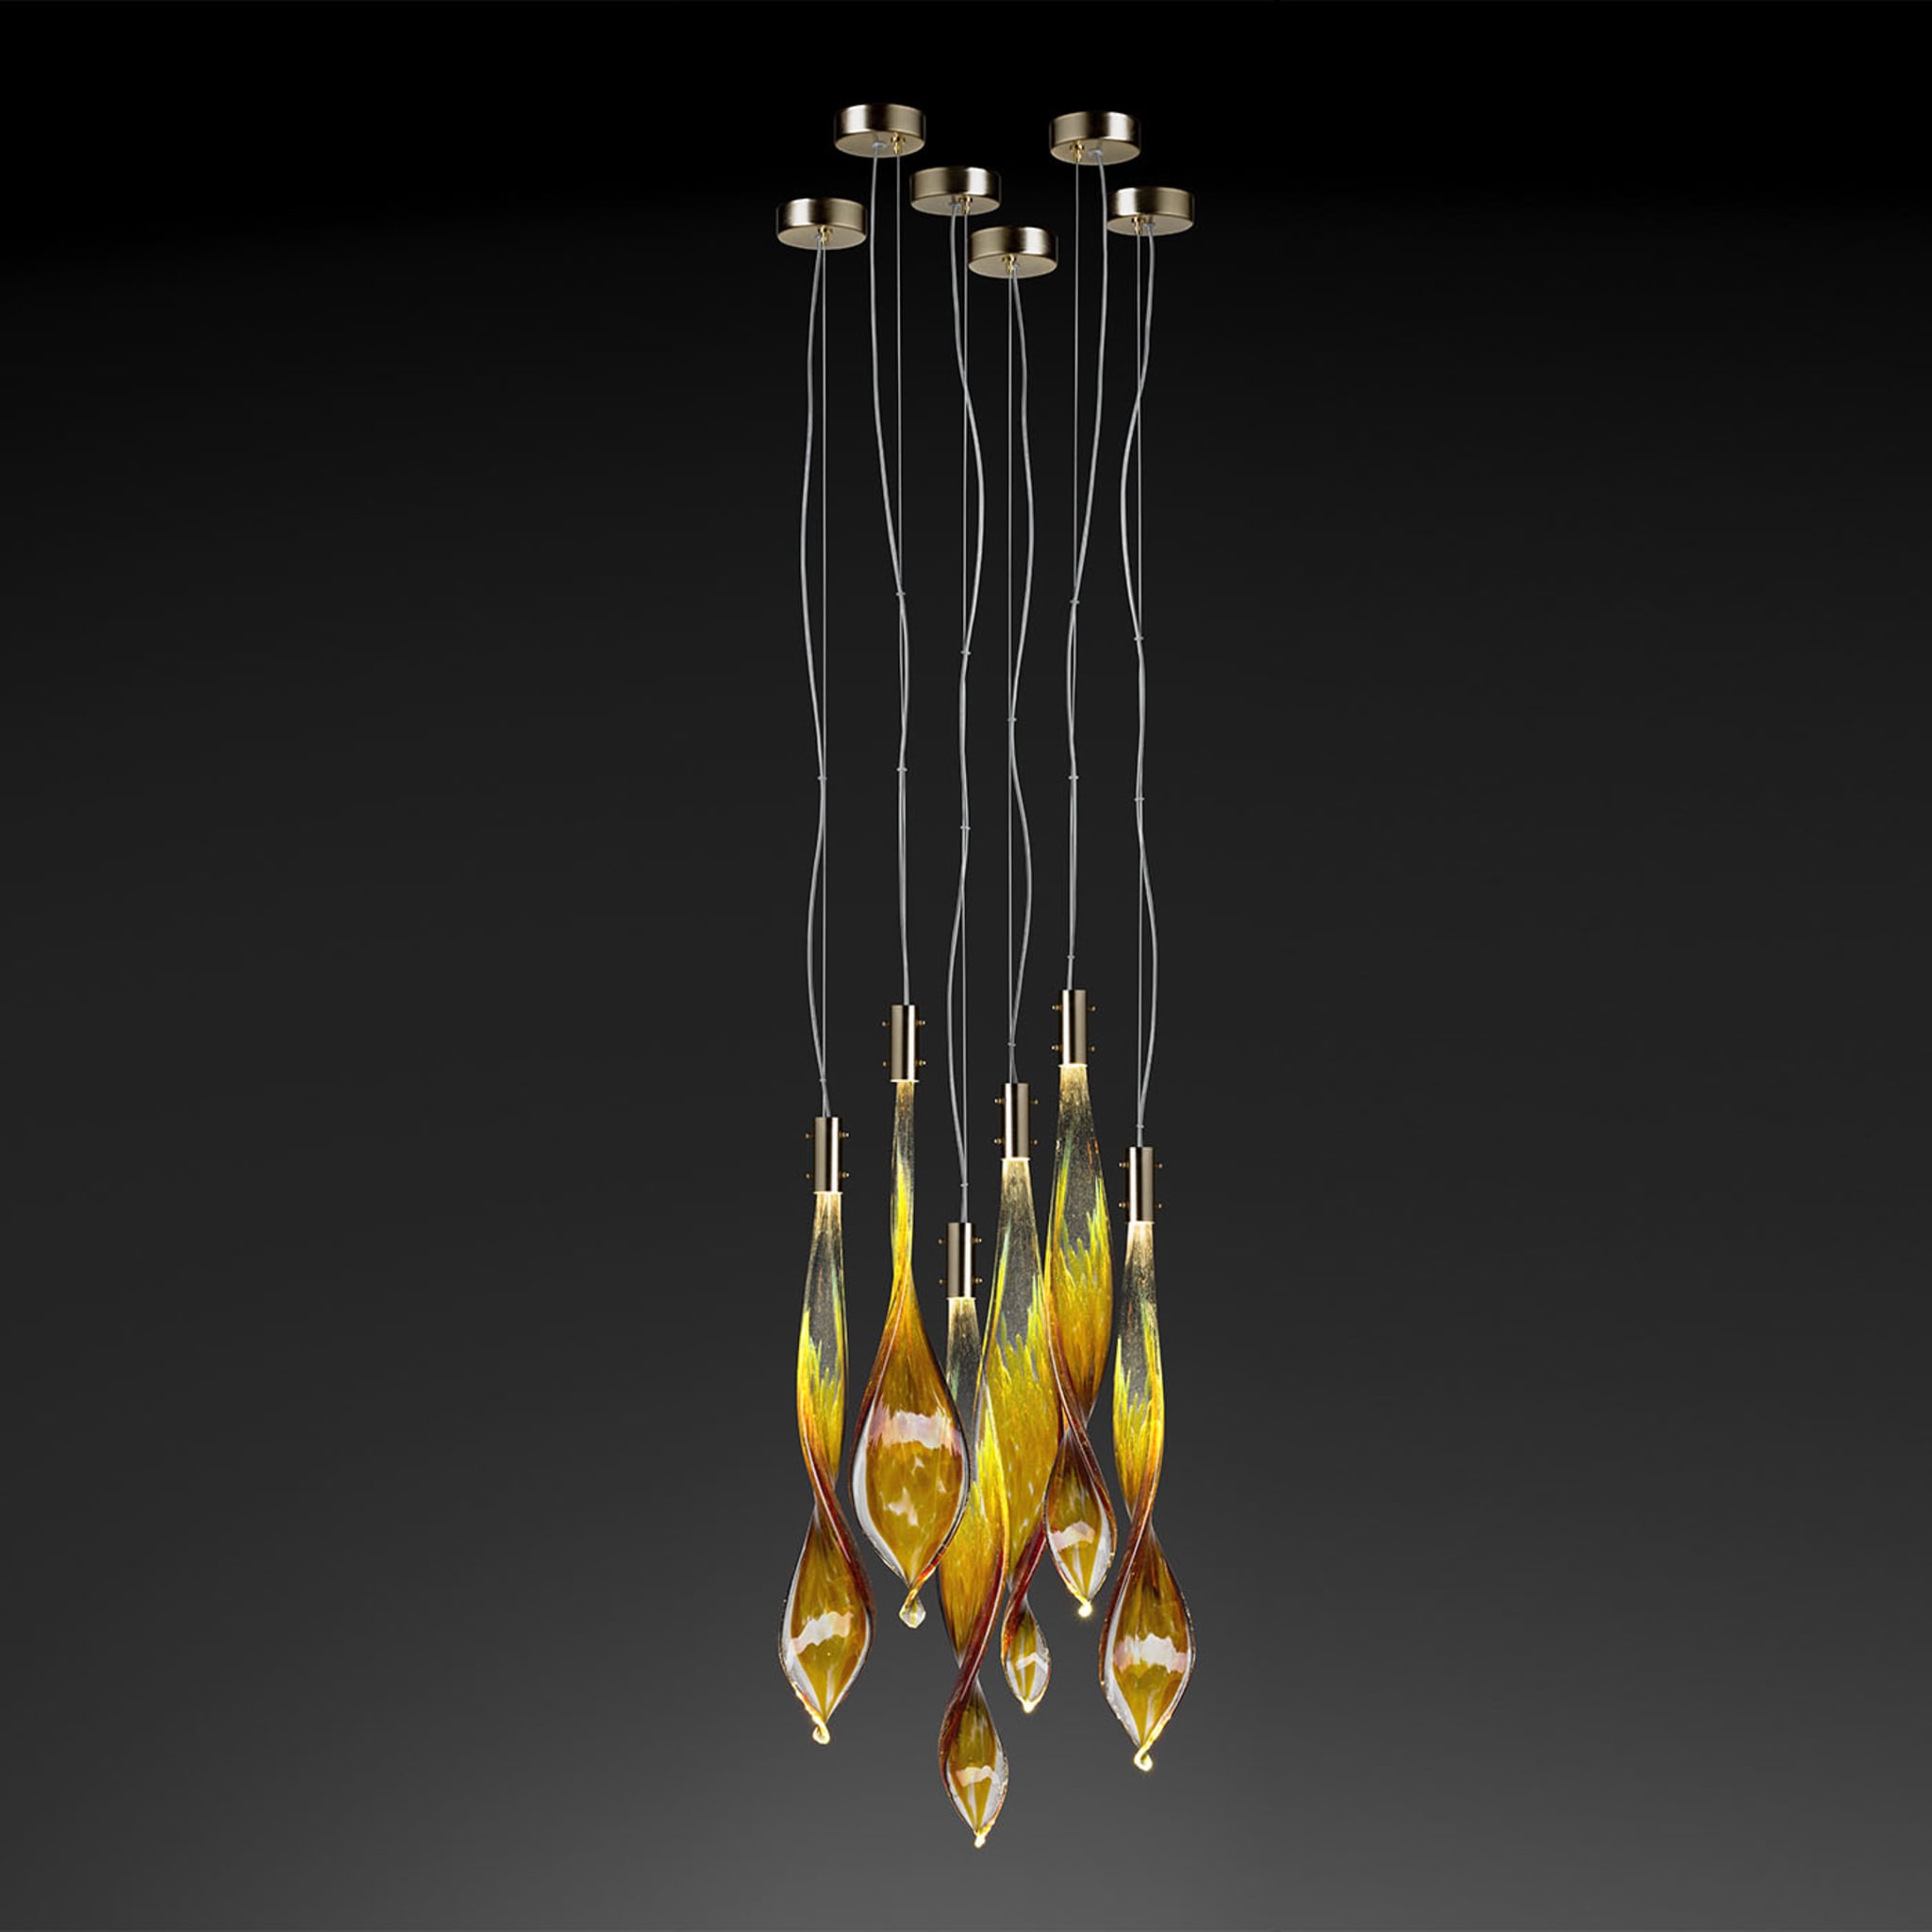 Glass Fall 6 Leaves Chandelier - Alternative view 1